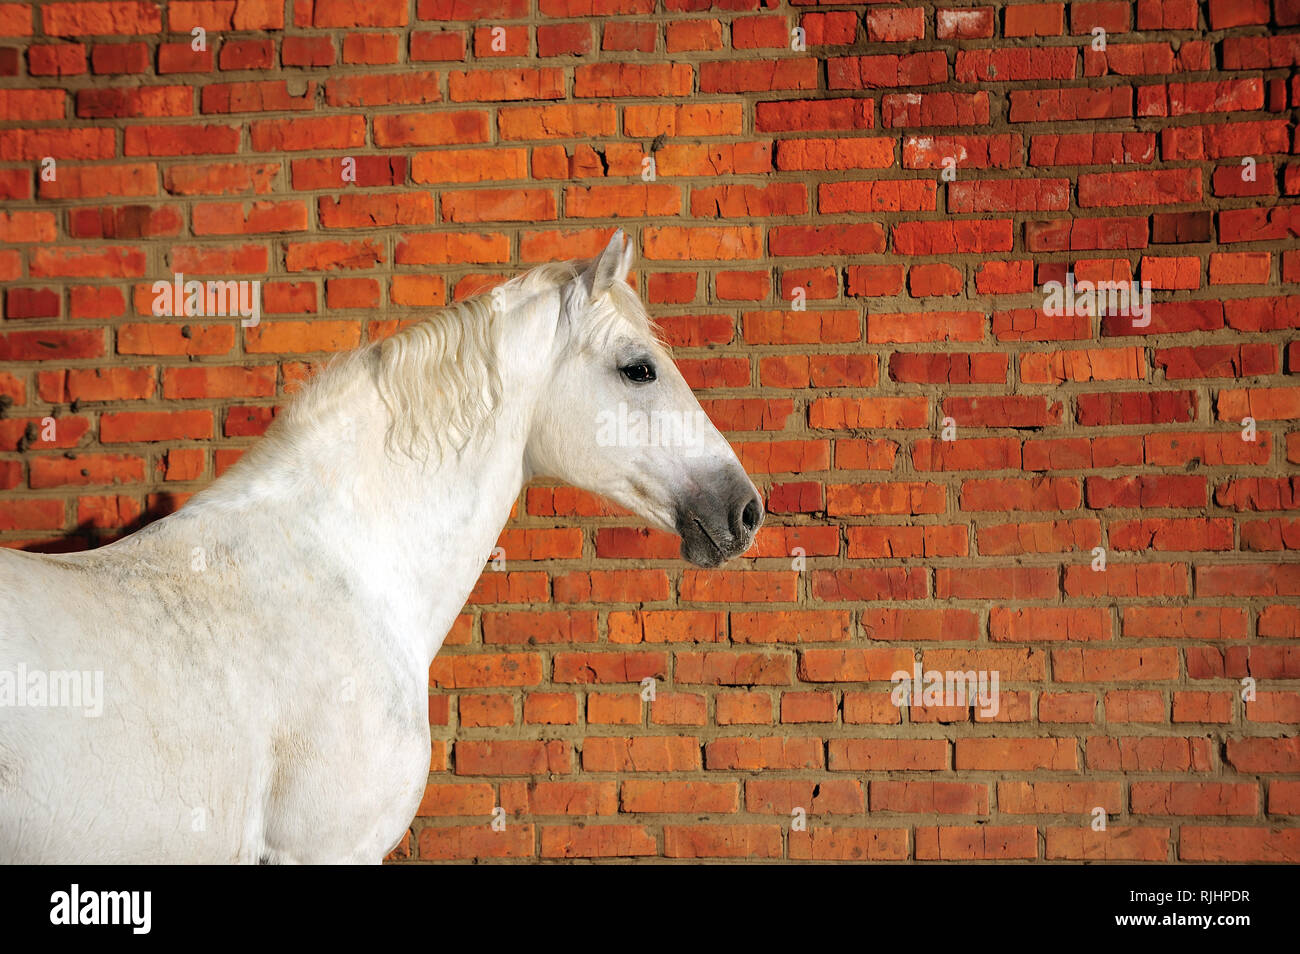 Light grey Orlov trotter horse stands beside red brick wall in winter, Horizonta, portrait, side view. Stock Photo